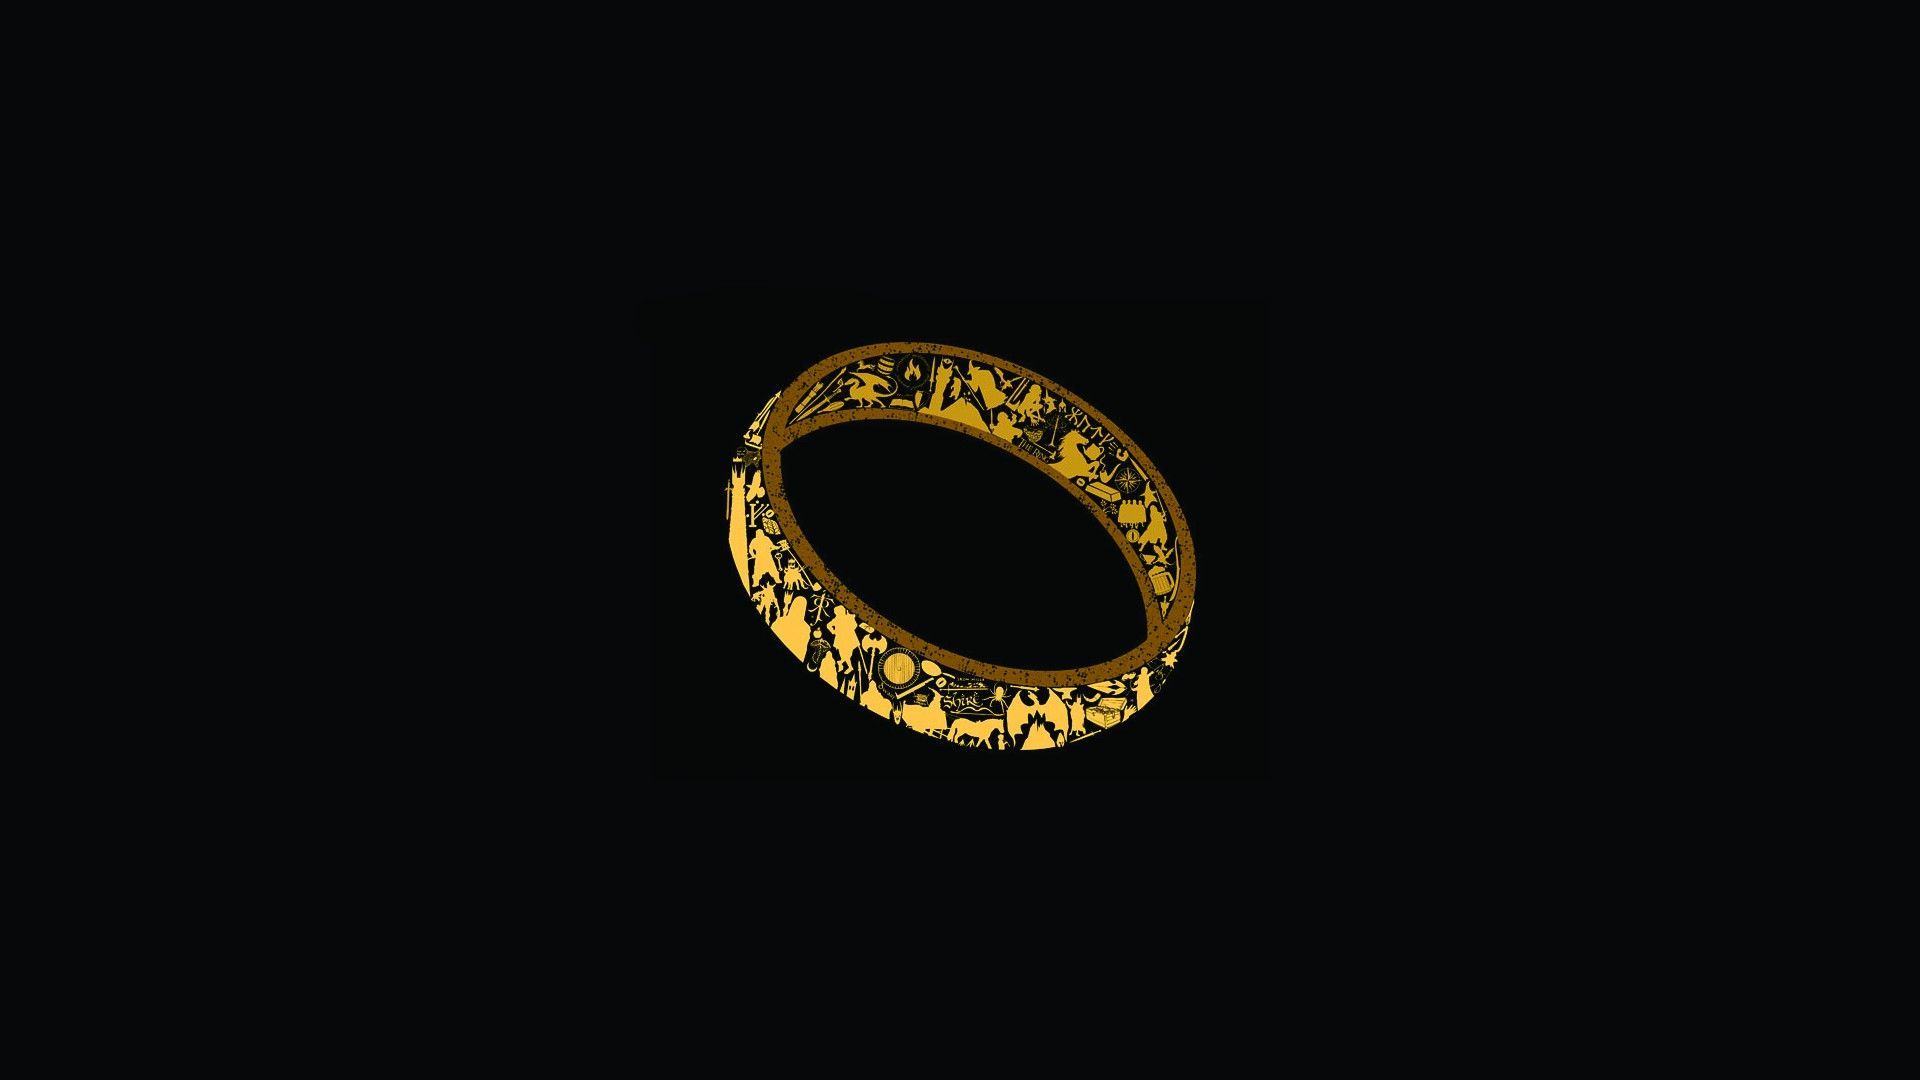 The Lord of the Rings The One Ring abstract geek minimalistic